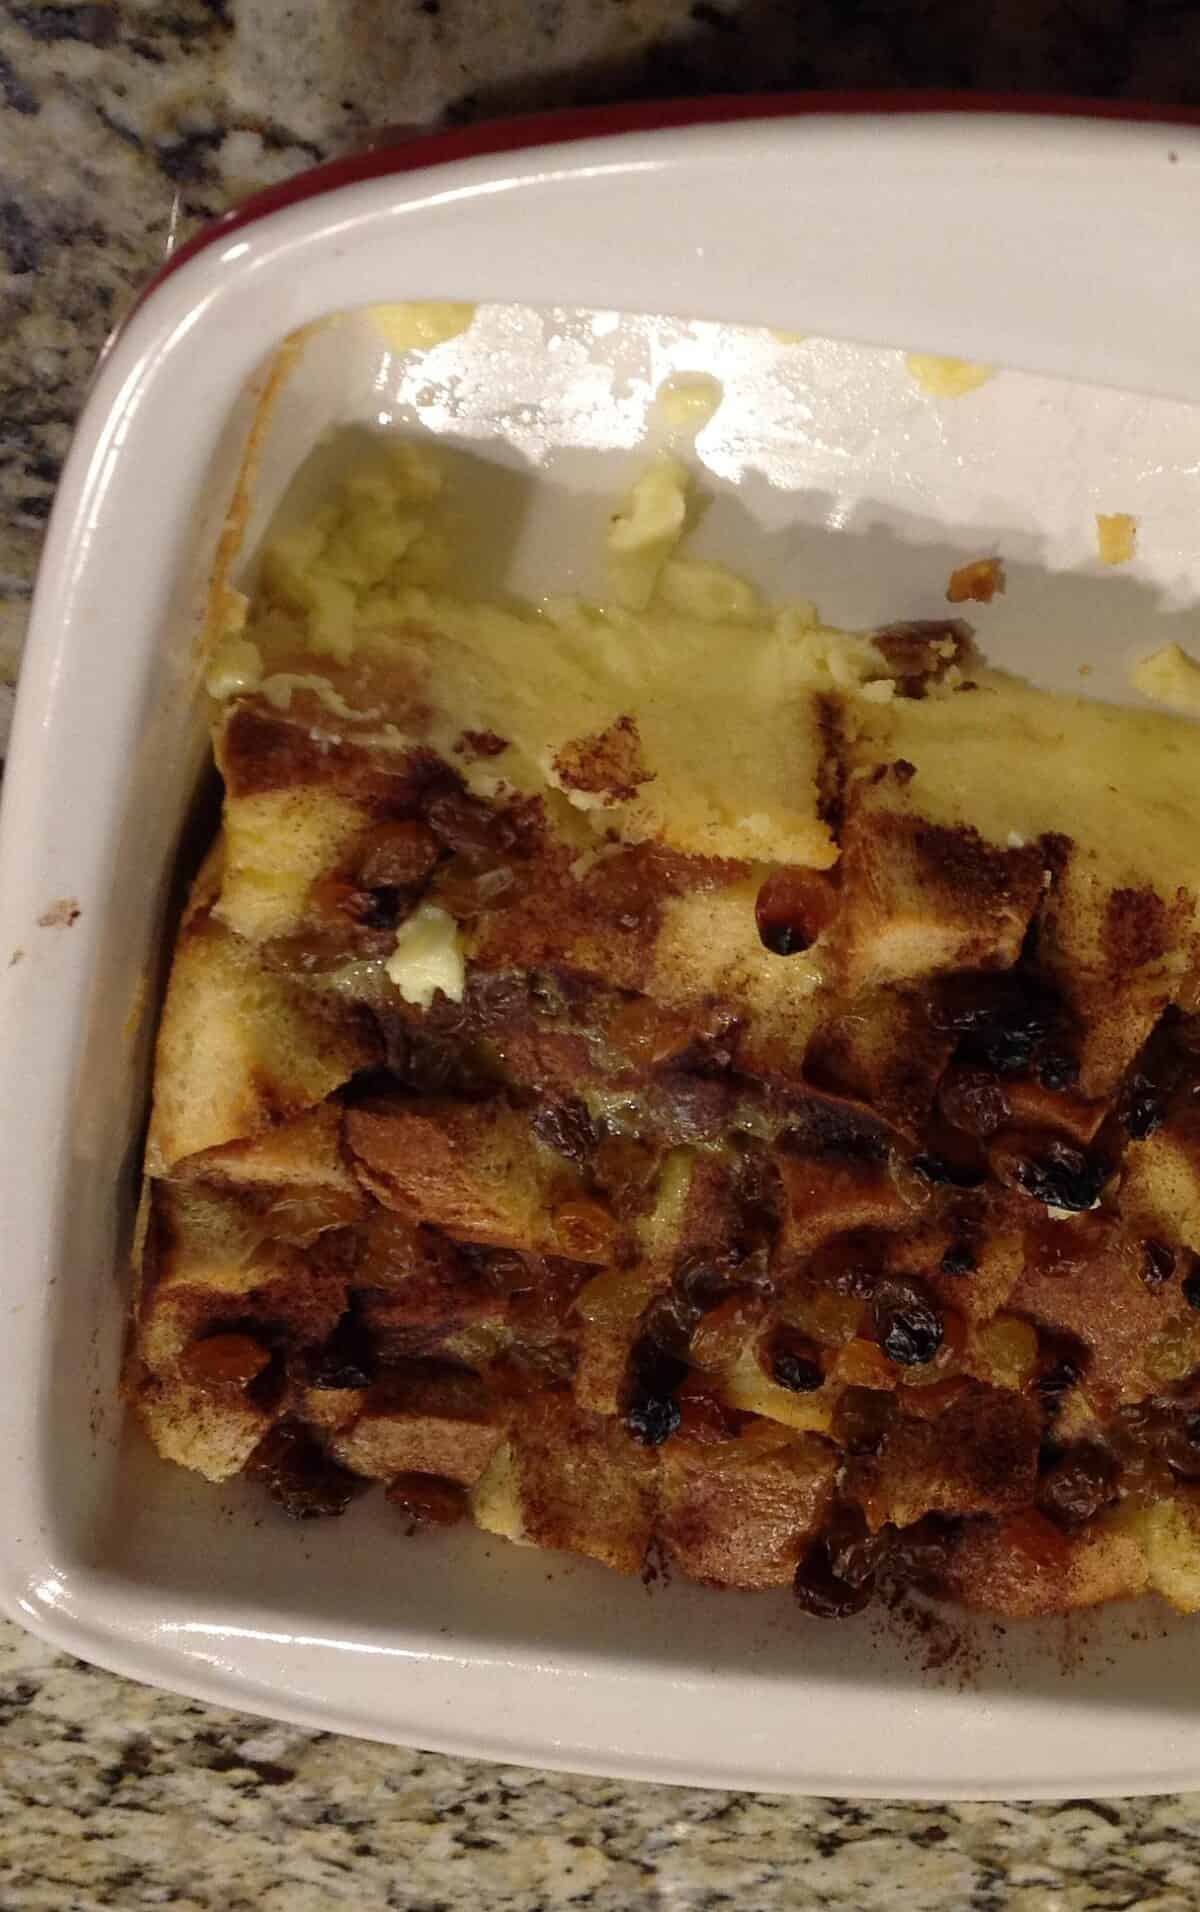 Golden Nugget's Bread Pudding